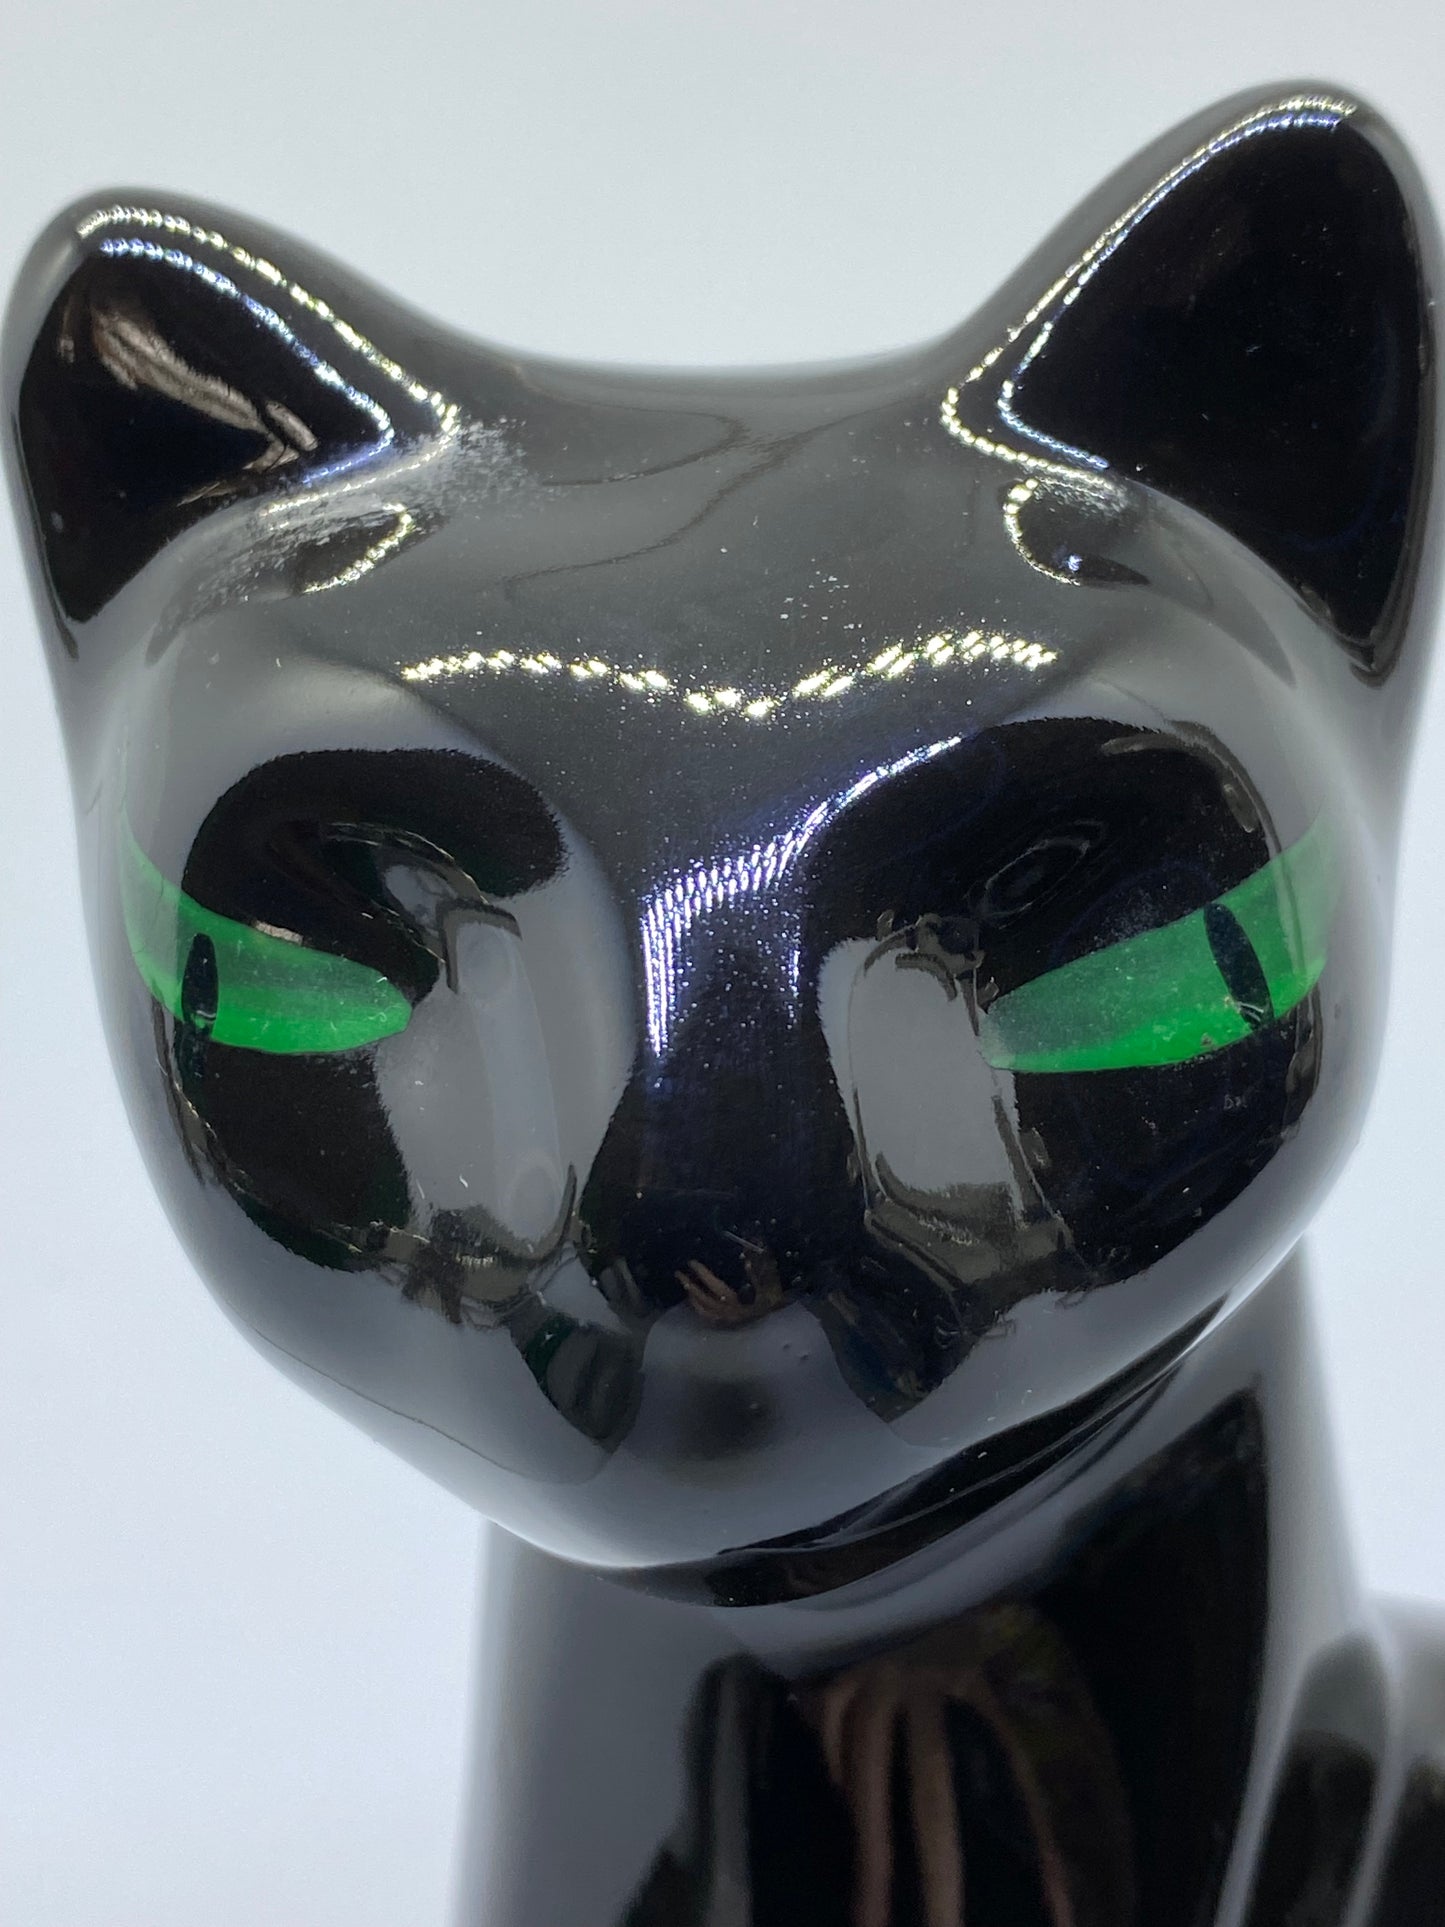 Large sleek and sexy Copperart 1980s Siamese Cat Statue